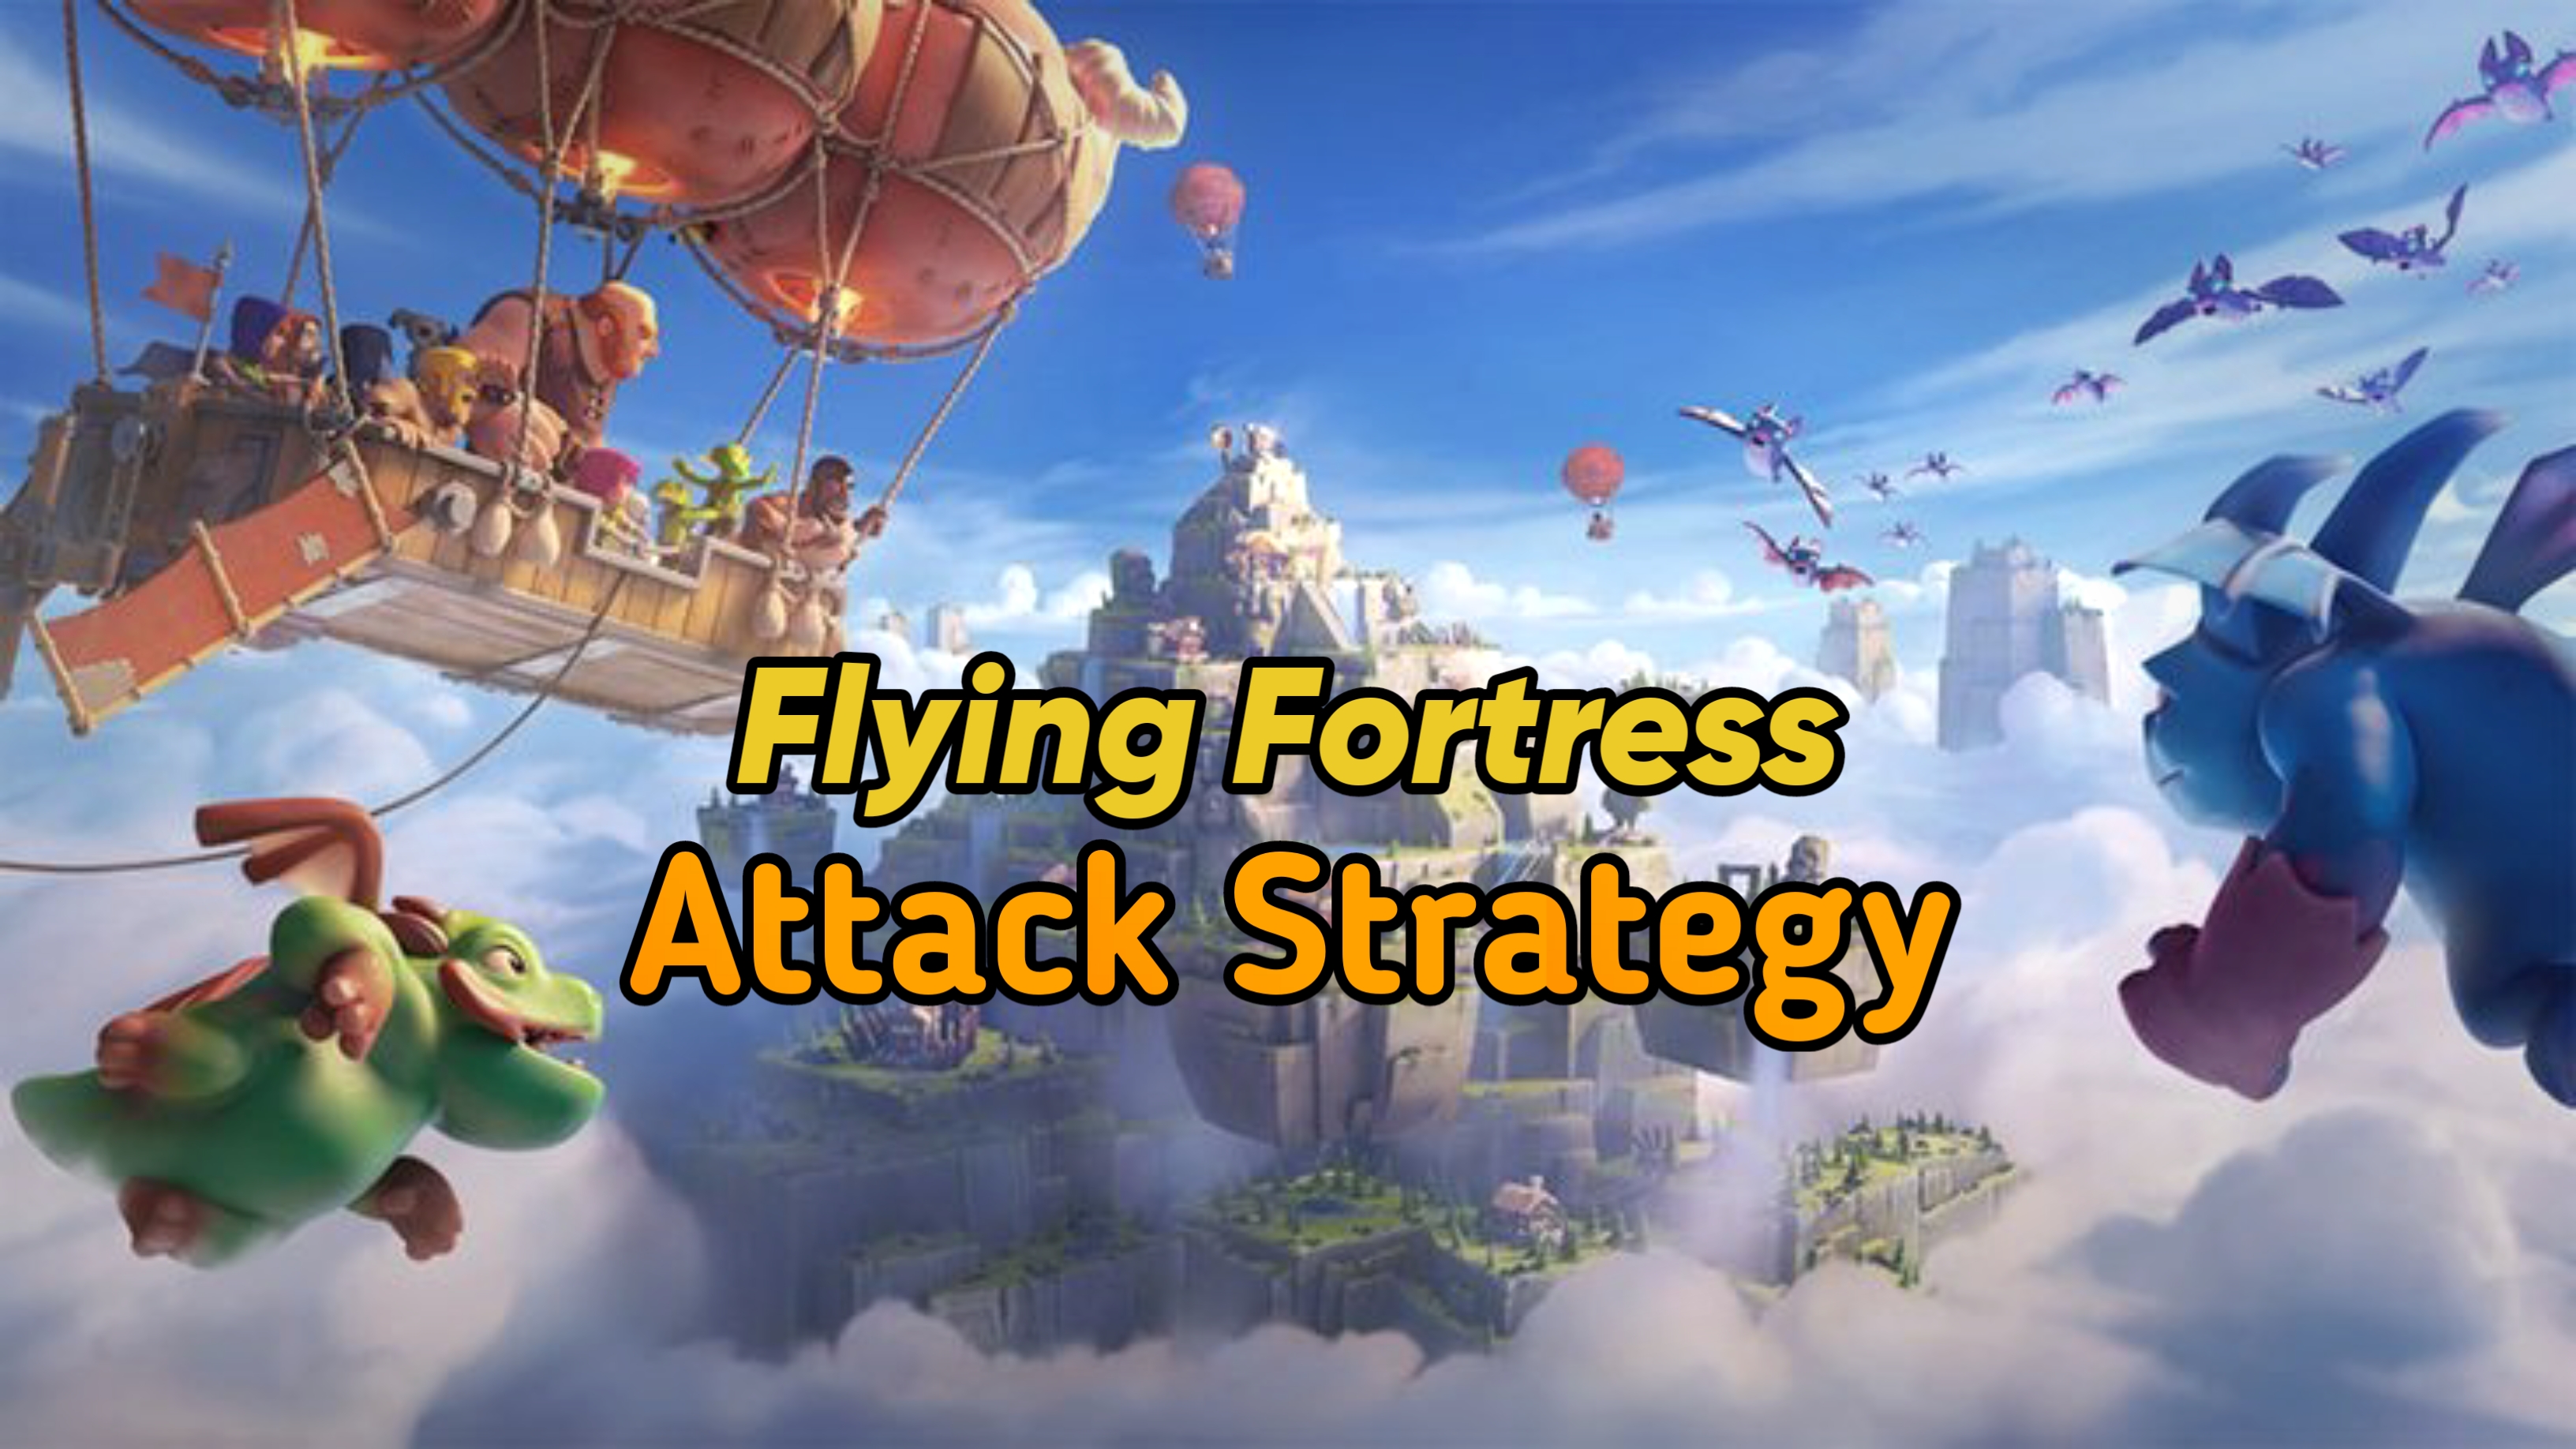 Flying Fortress attack strategy